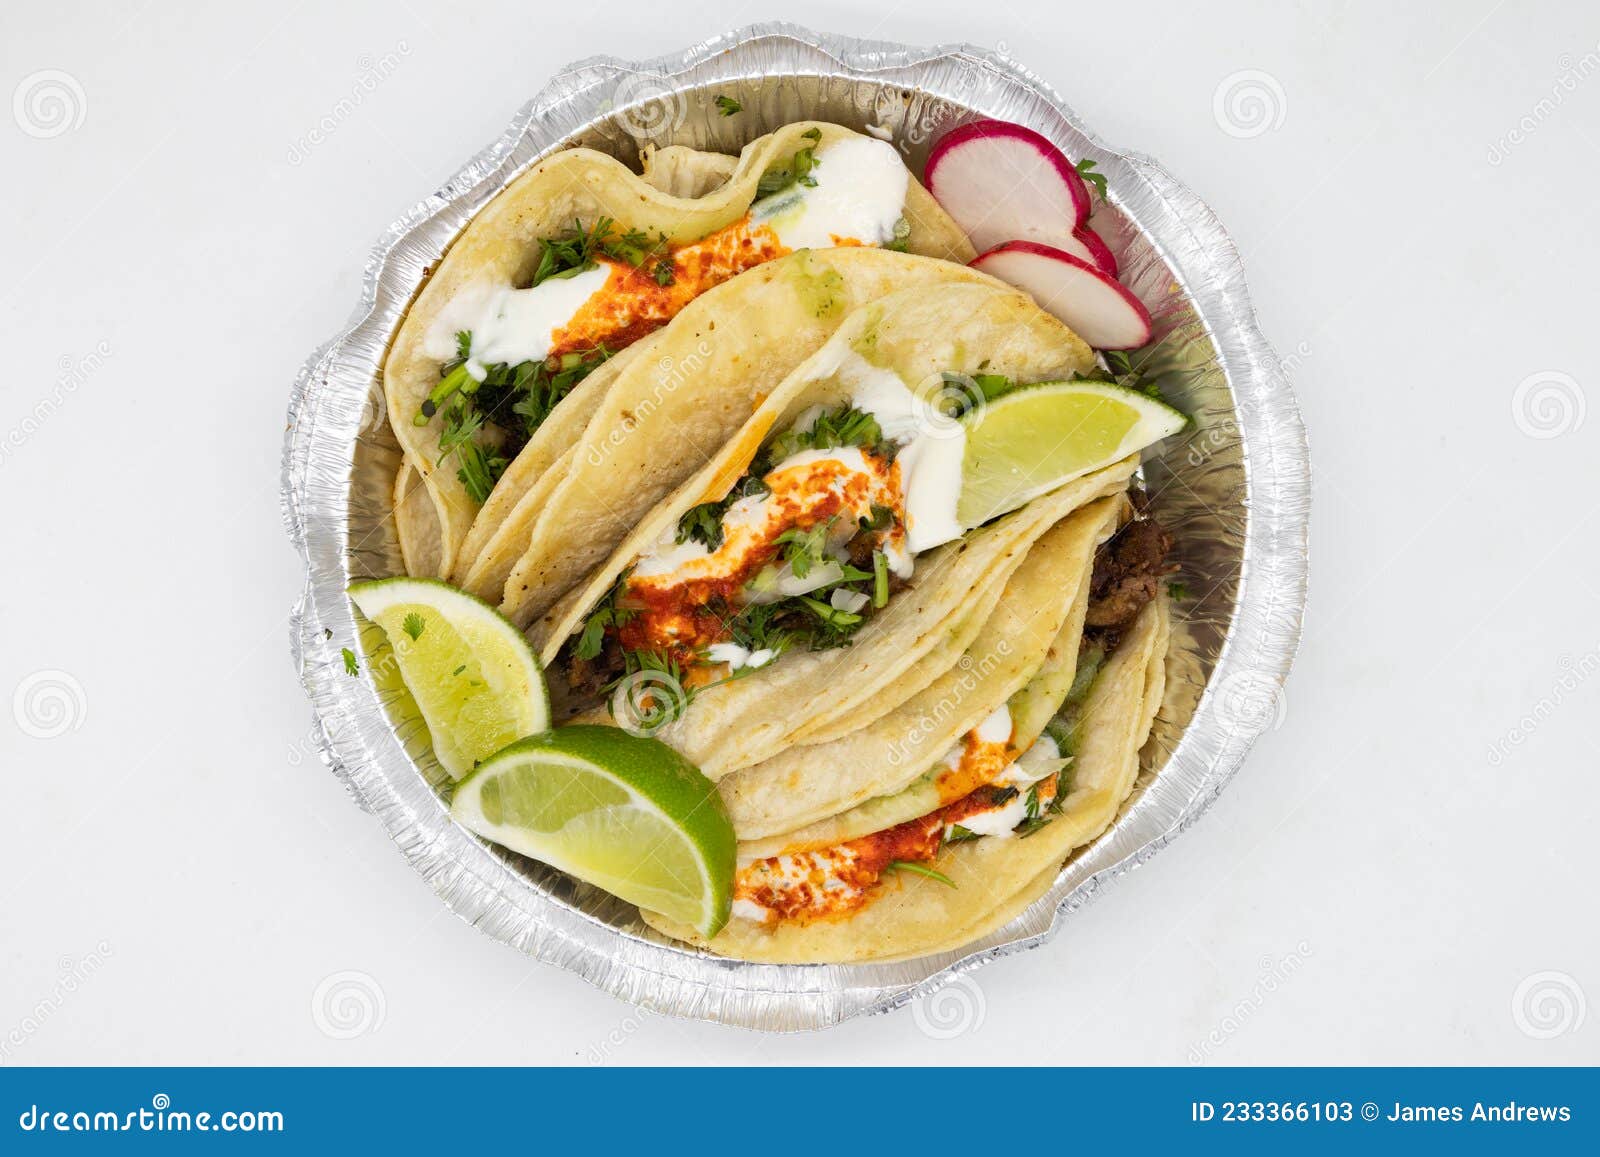 delicious lengua tacos with limes and sour cream in a takeout container